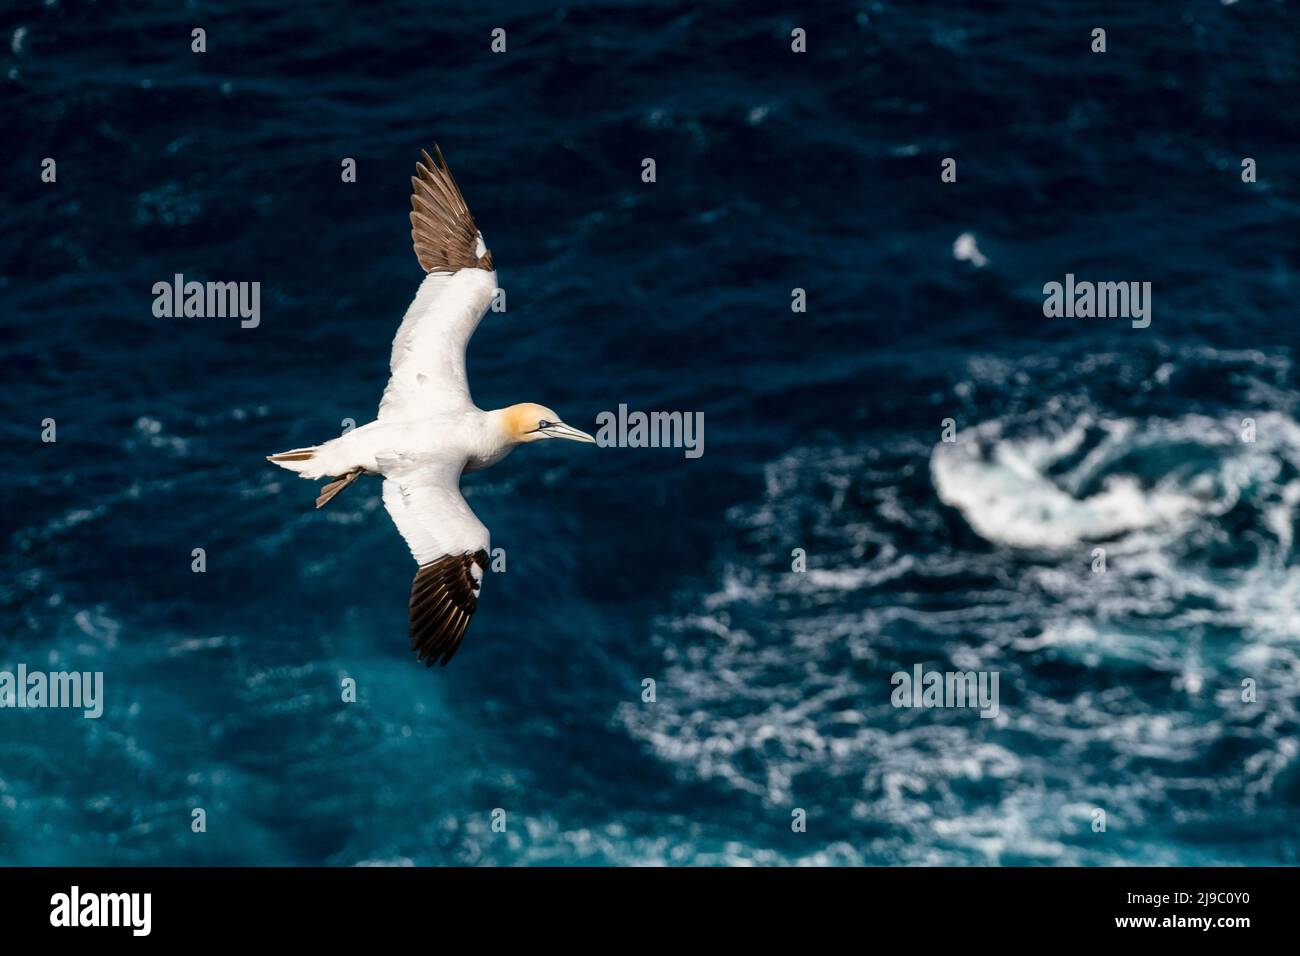 A gannet with trademark yellow head and bright blue eyes soars in perfect symmetry over the cobalt sea. Stock Photo